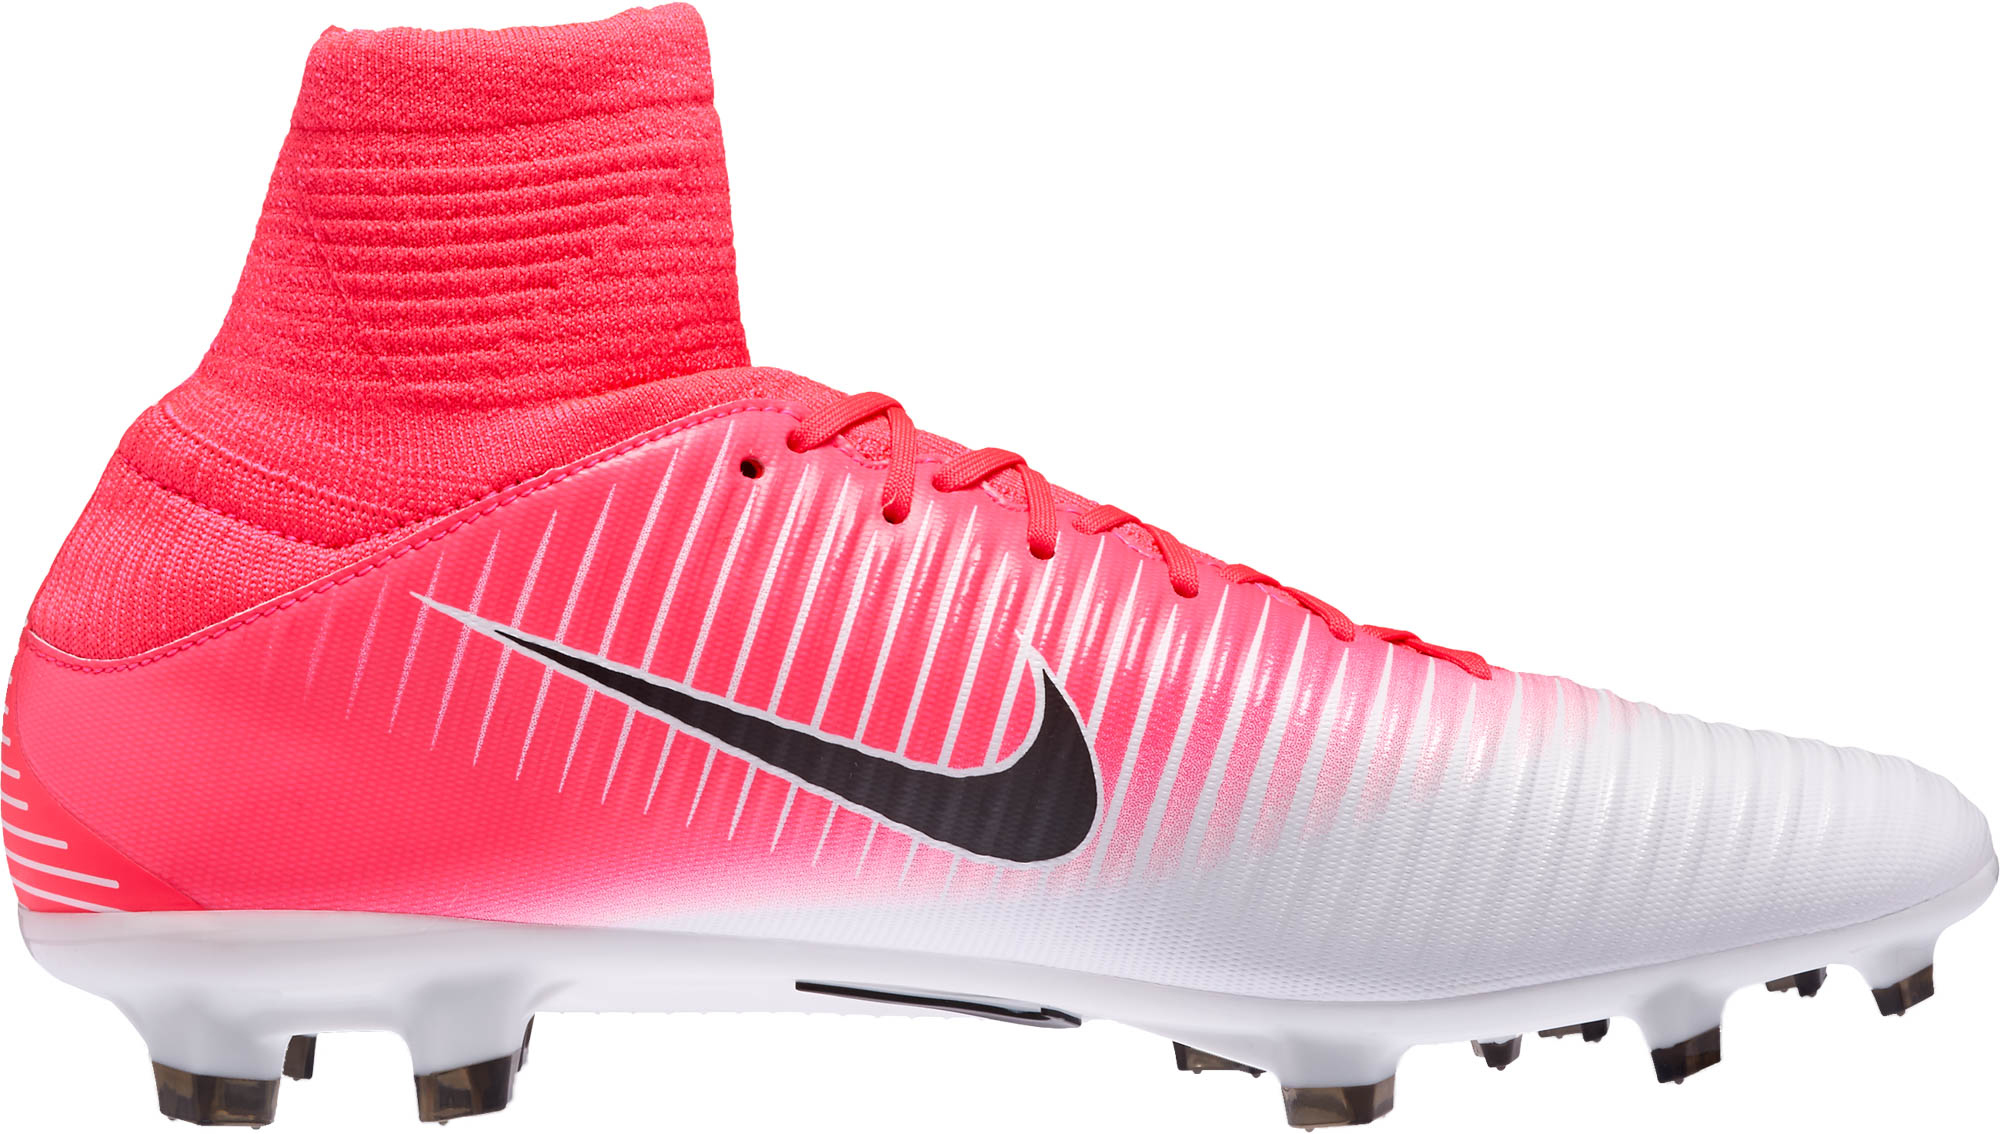 Mercurial Veloce FG - Pink Soccer Cleats